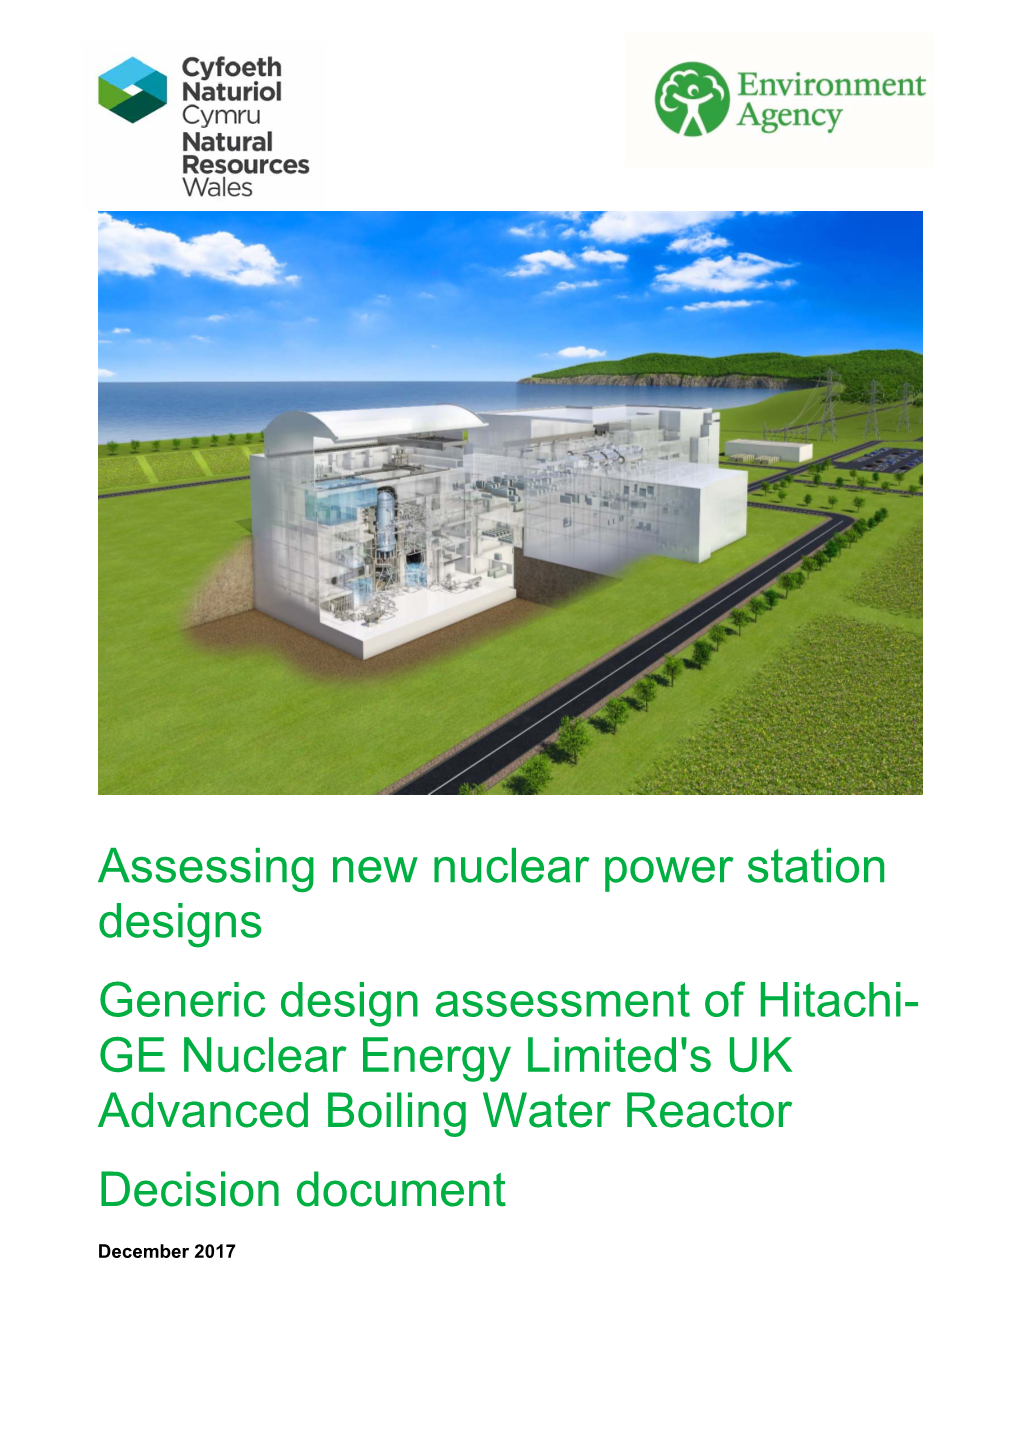 Assessing New Nuclear Power Station Designs Generic Design Assessment of Hitachi- GE Nuclear Energy Limited's UK Advanced Boiling Water Reactor Decision Document